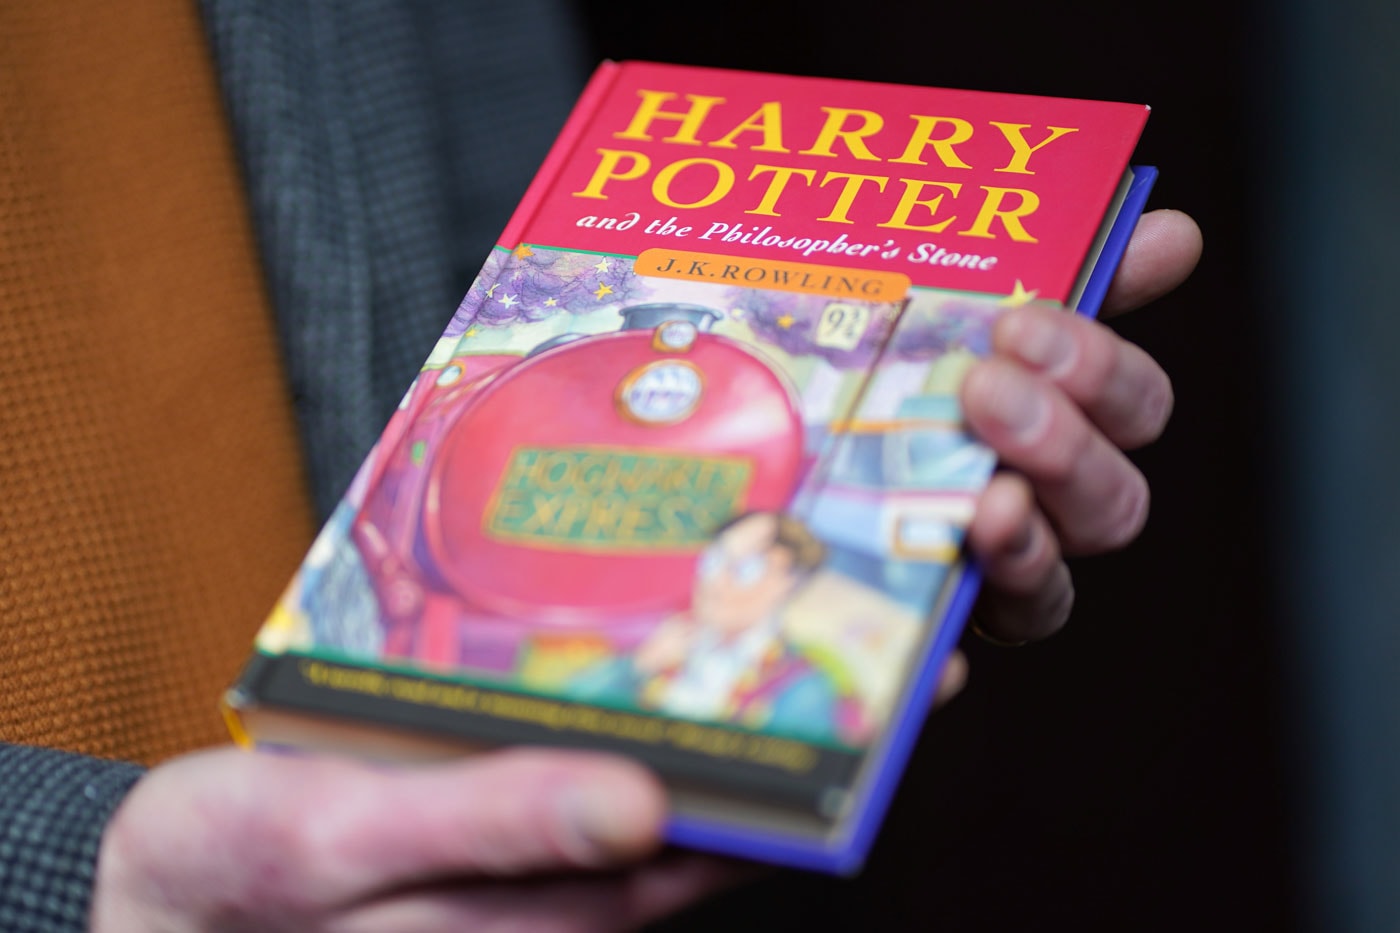 Bidding Starts 250000 USD First-Edition Harry Potter and the Philosopher's Stone hardcover book 500 200 the art of literature loan and selling exhibition event price date info 